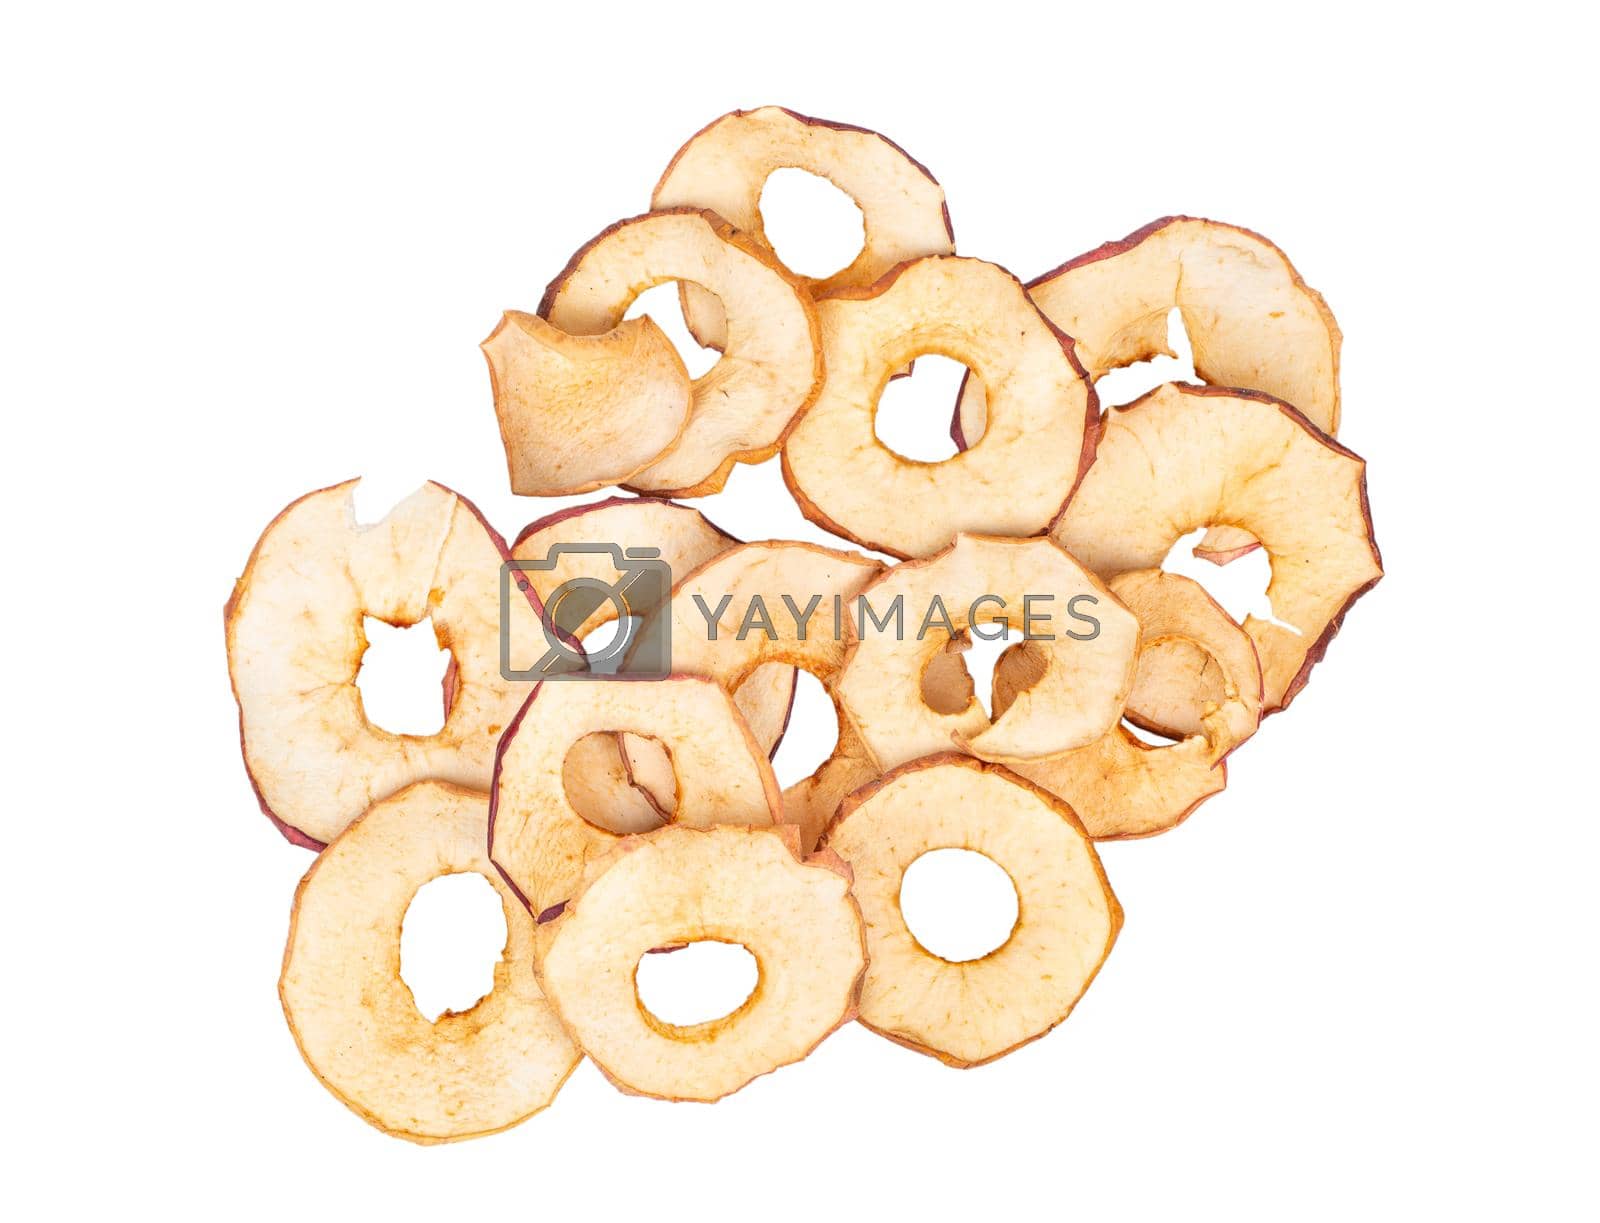 Royalty free image of Heap Apple chips by andregric